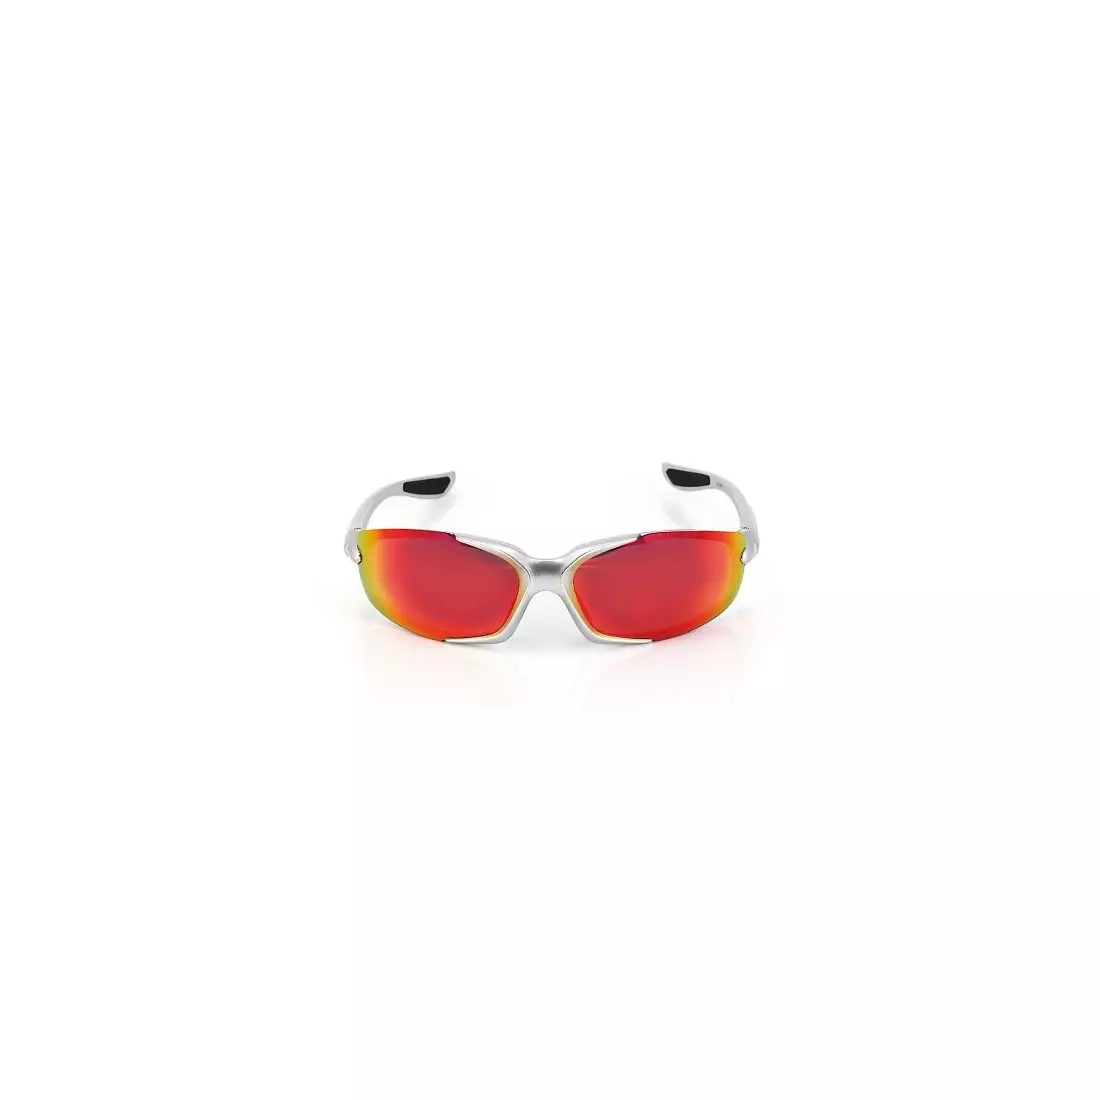 XLC GALAPAGOS - sports glasses - 156600 - color: Silver